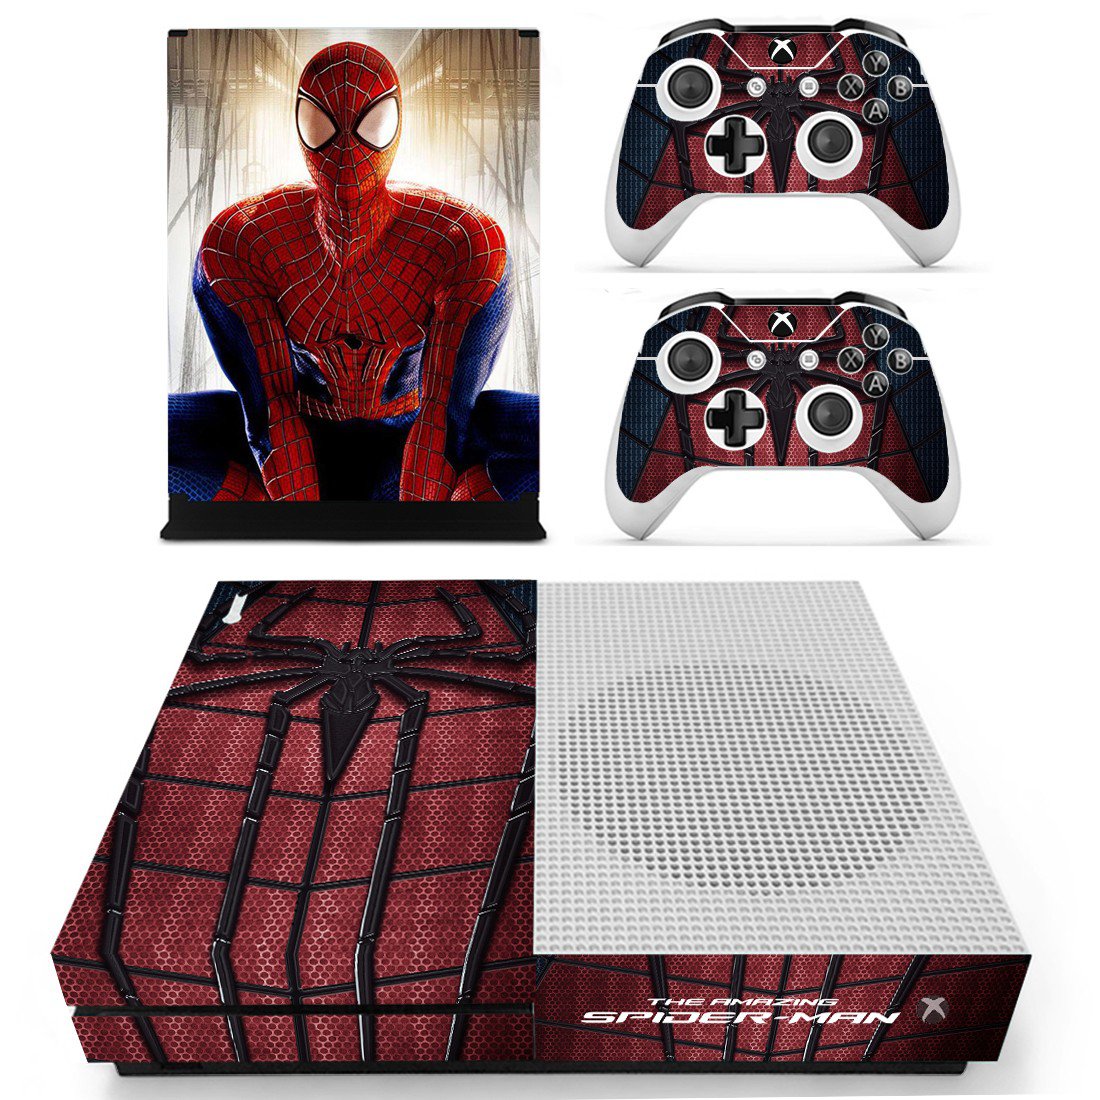 Xbox One S Skin Cover - The Amazing Spider Man